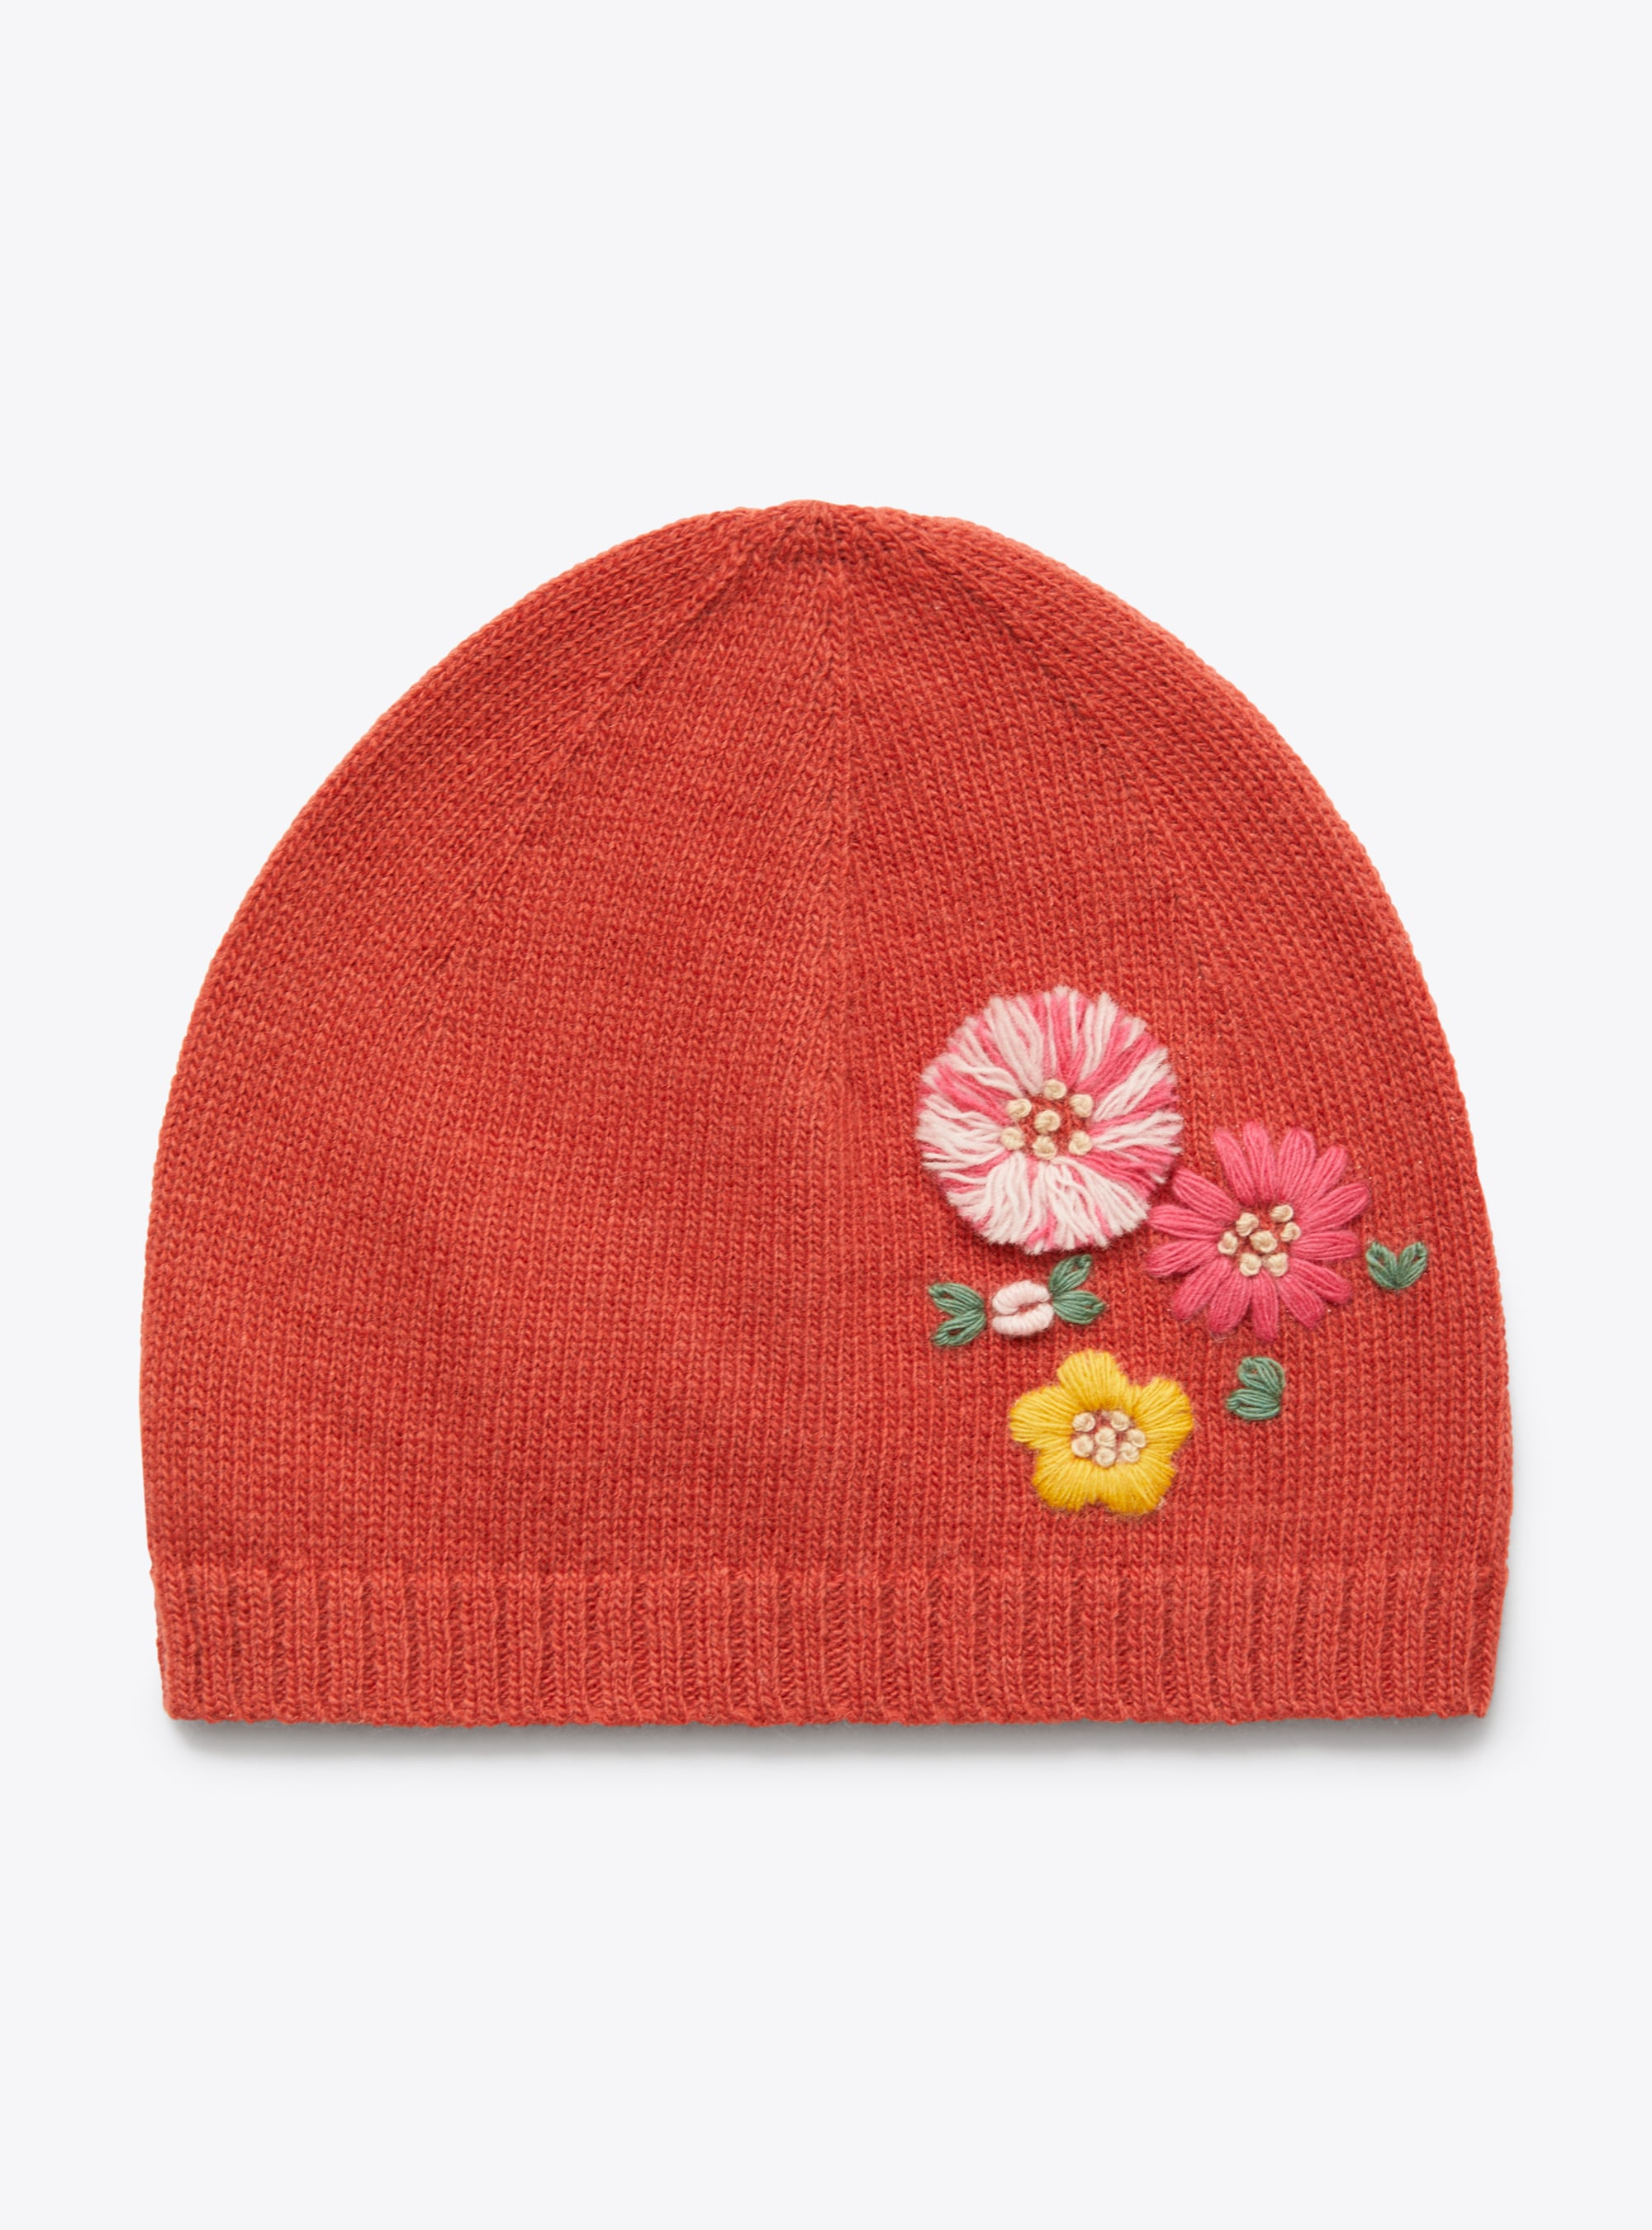 Brick-red beanie with embroidered flowers - Accessories - Il Gufo